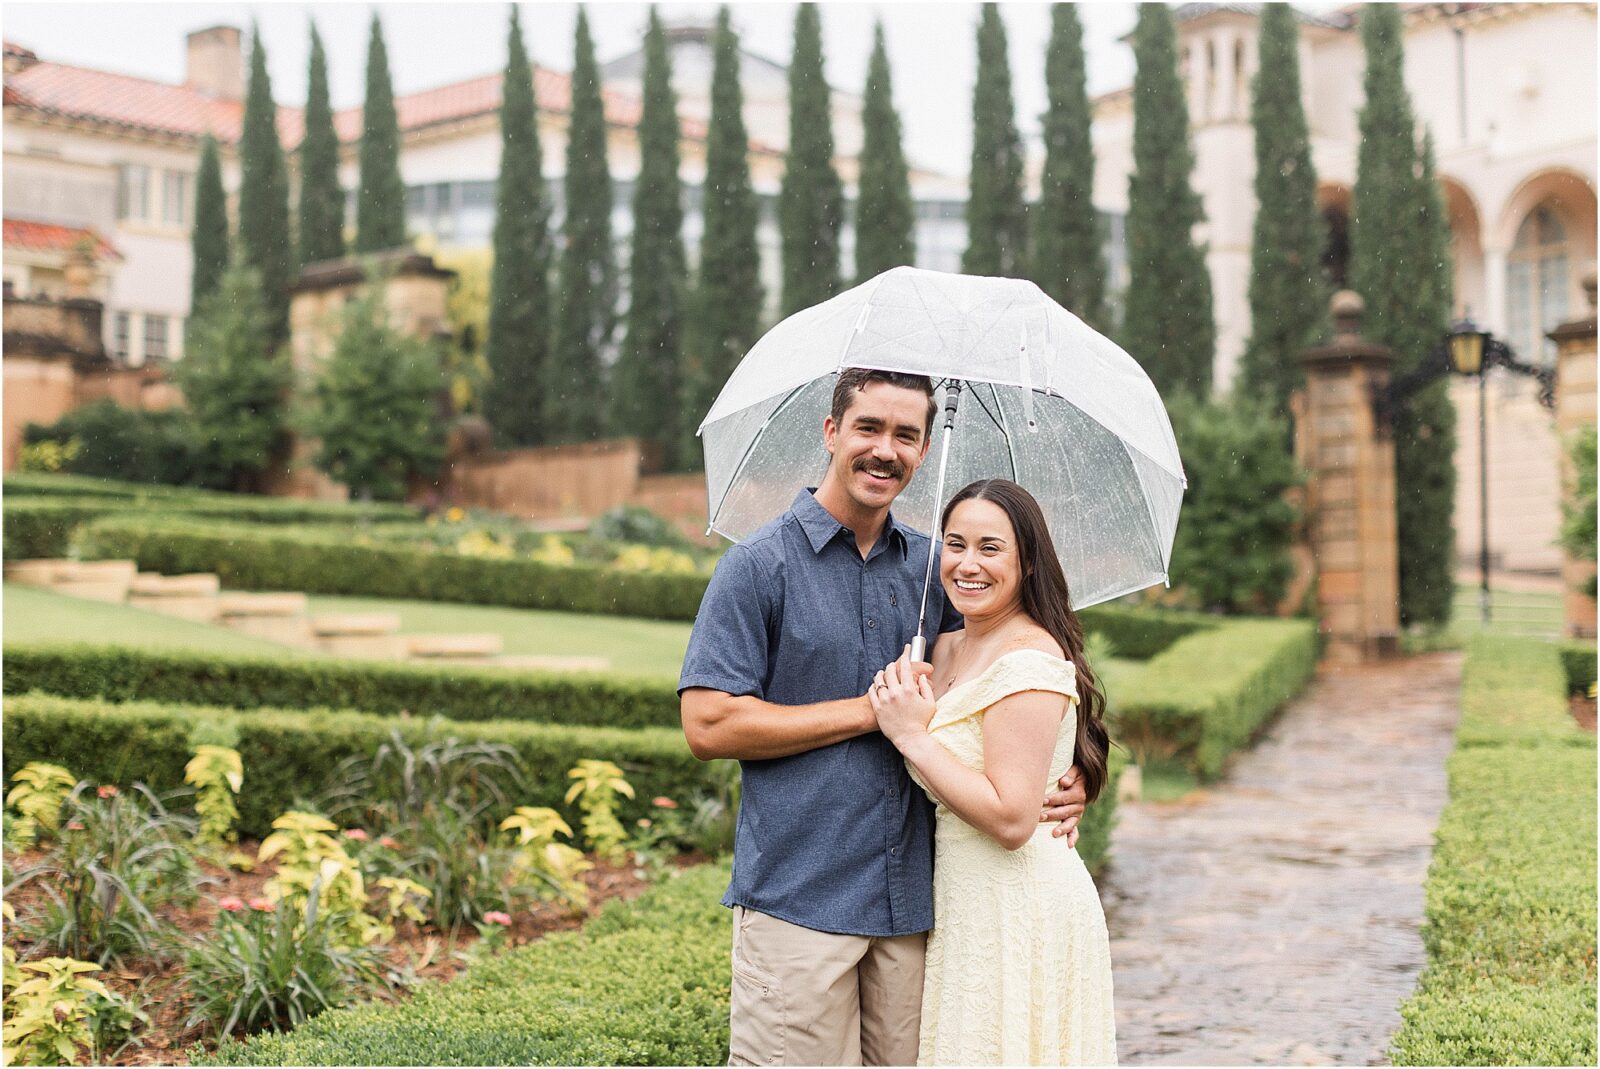 Marie and Mark under an umbrella during a rainy engagement session at the philbrook